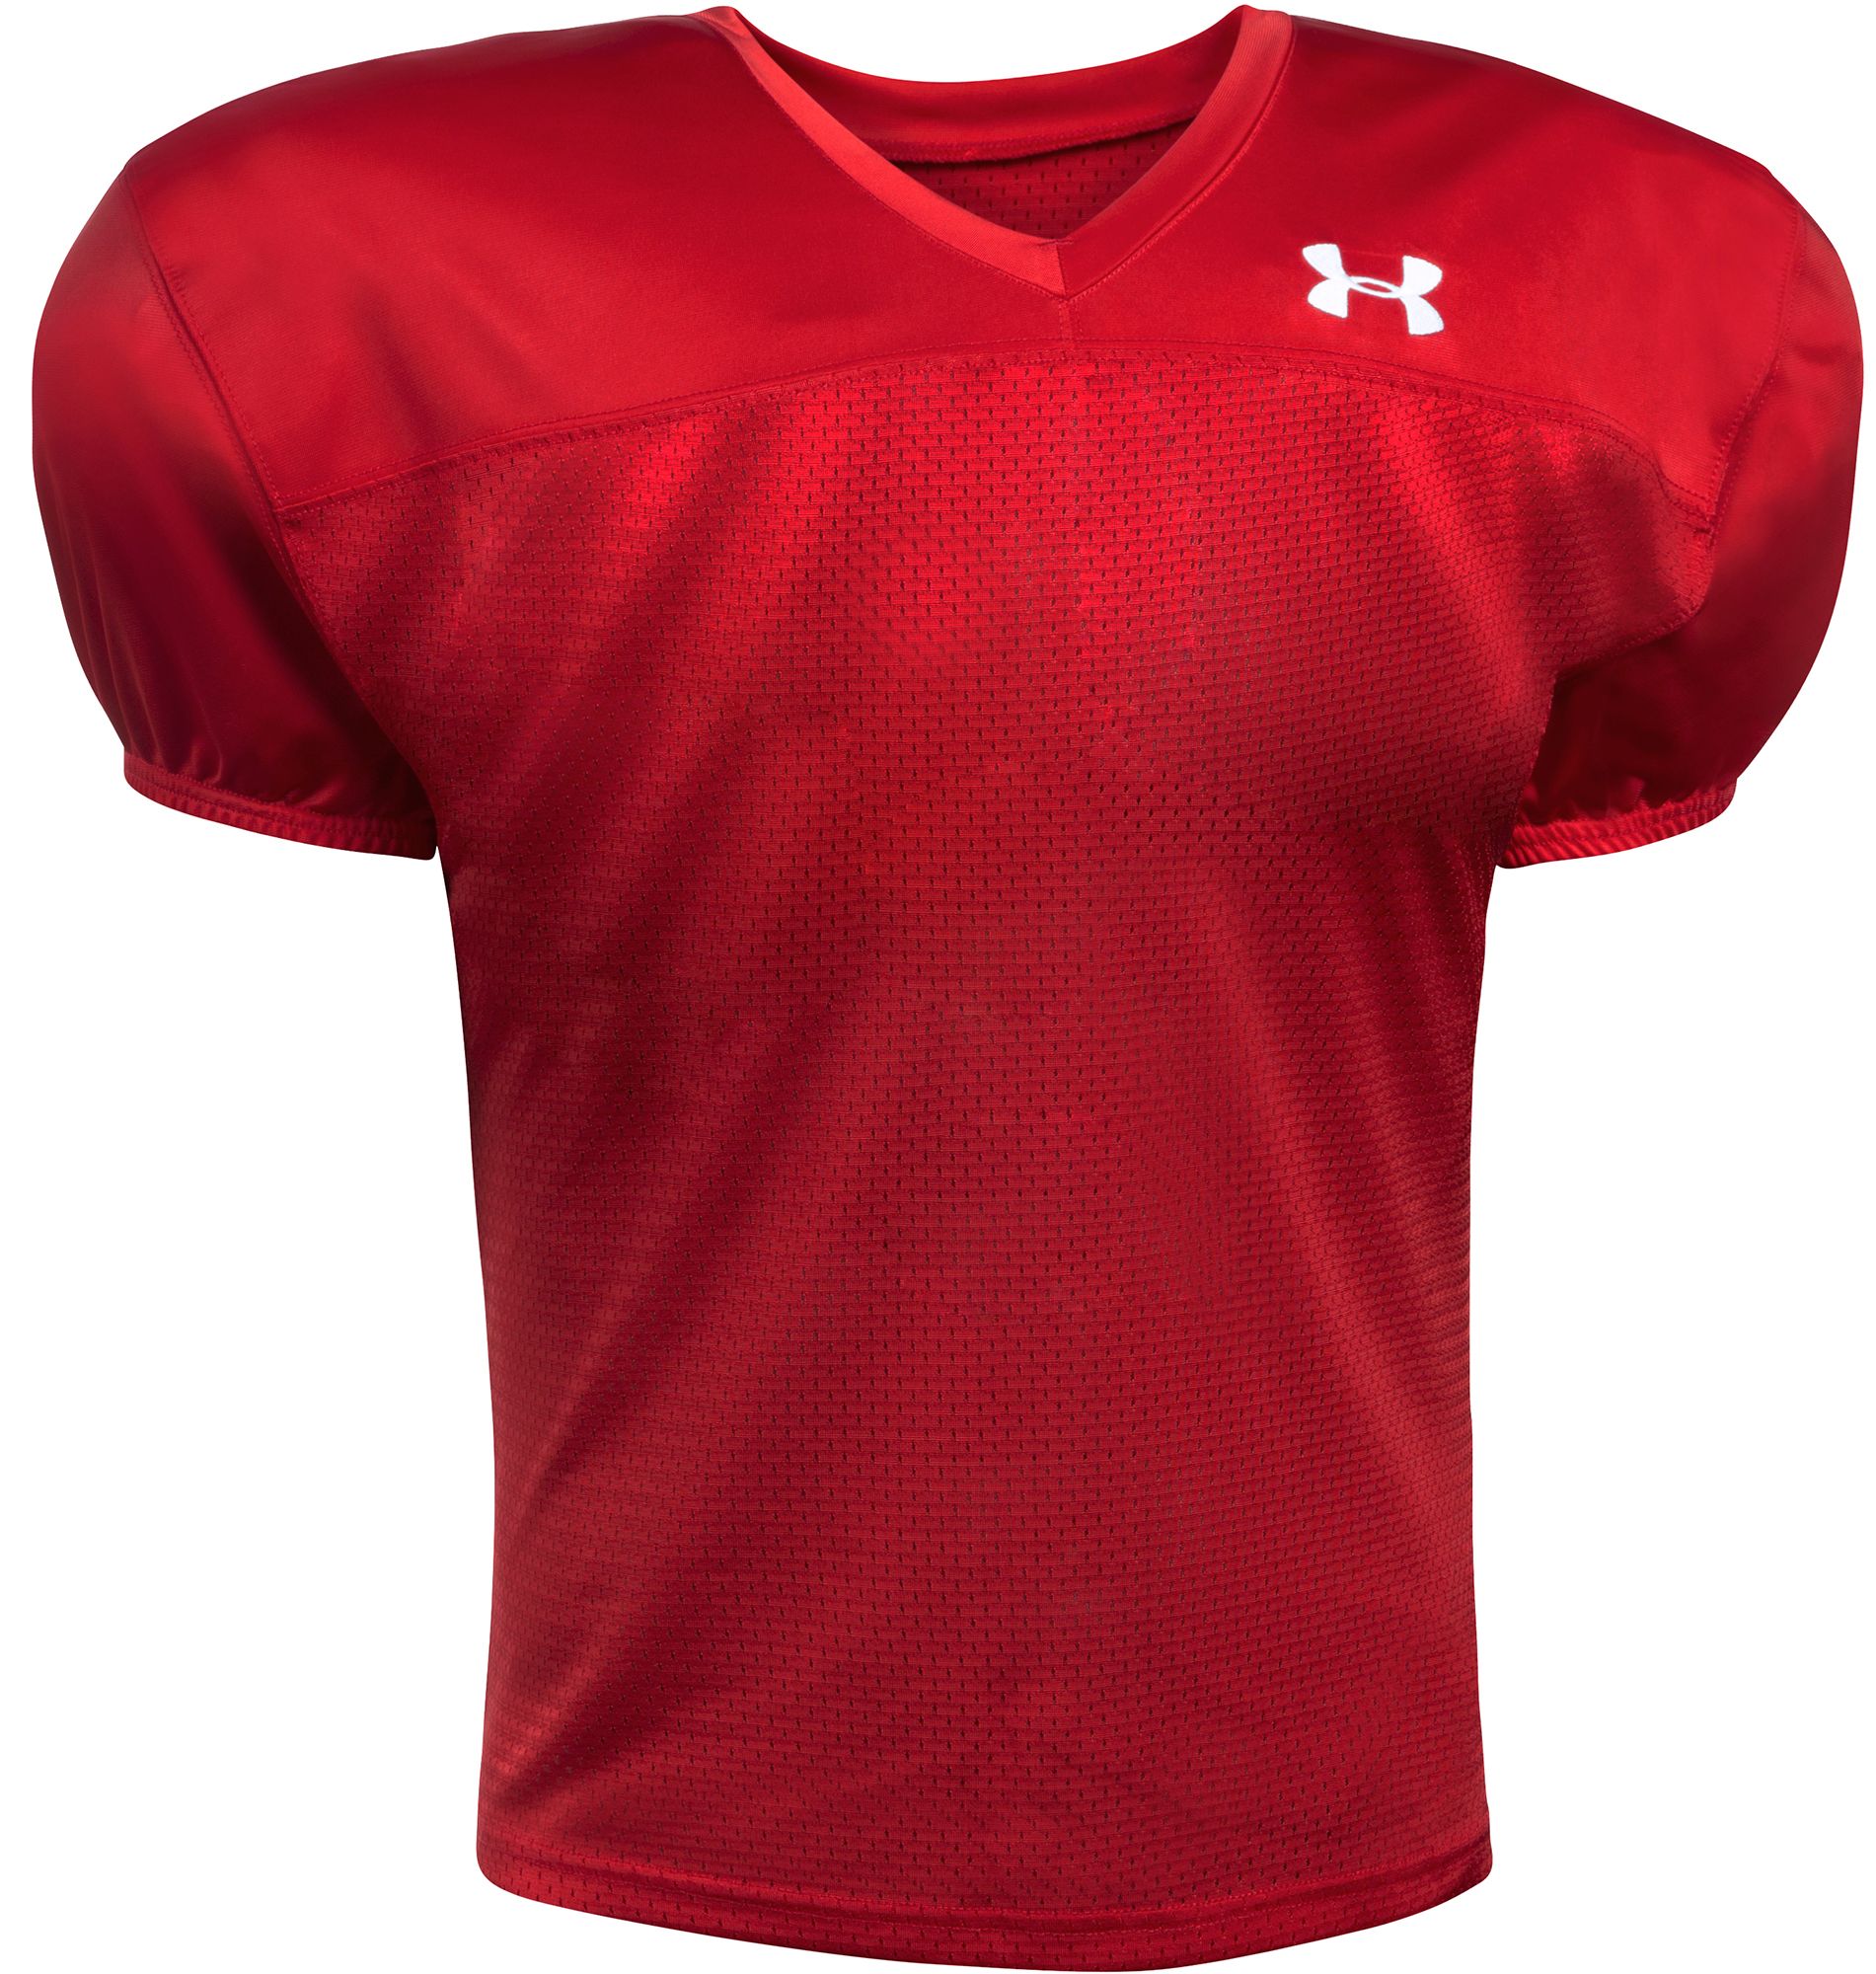 Football Apparel for Men & Kids | Curbside Pickup Available at DICK'S